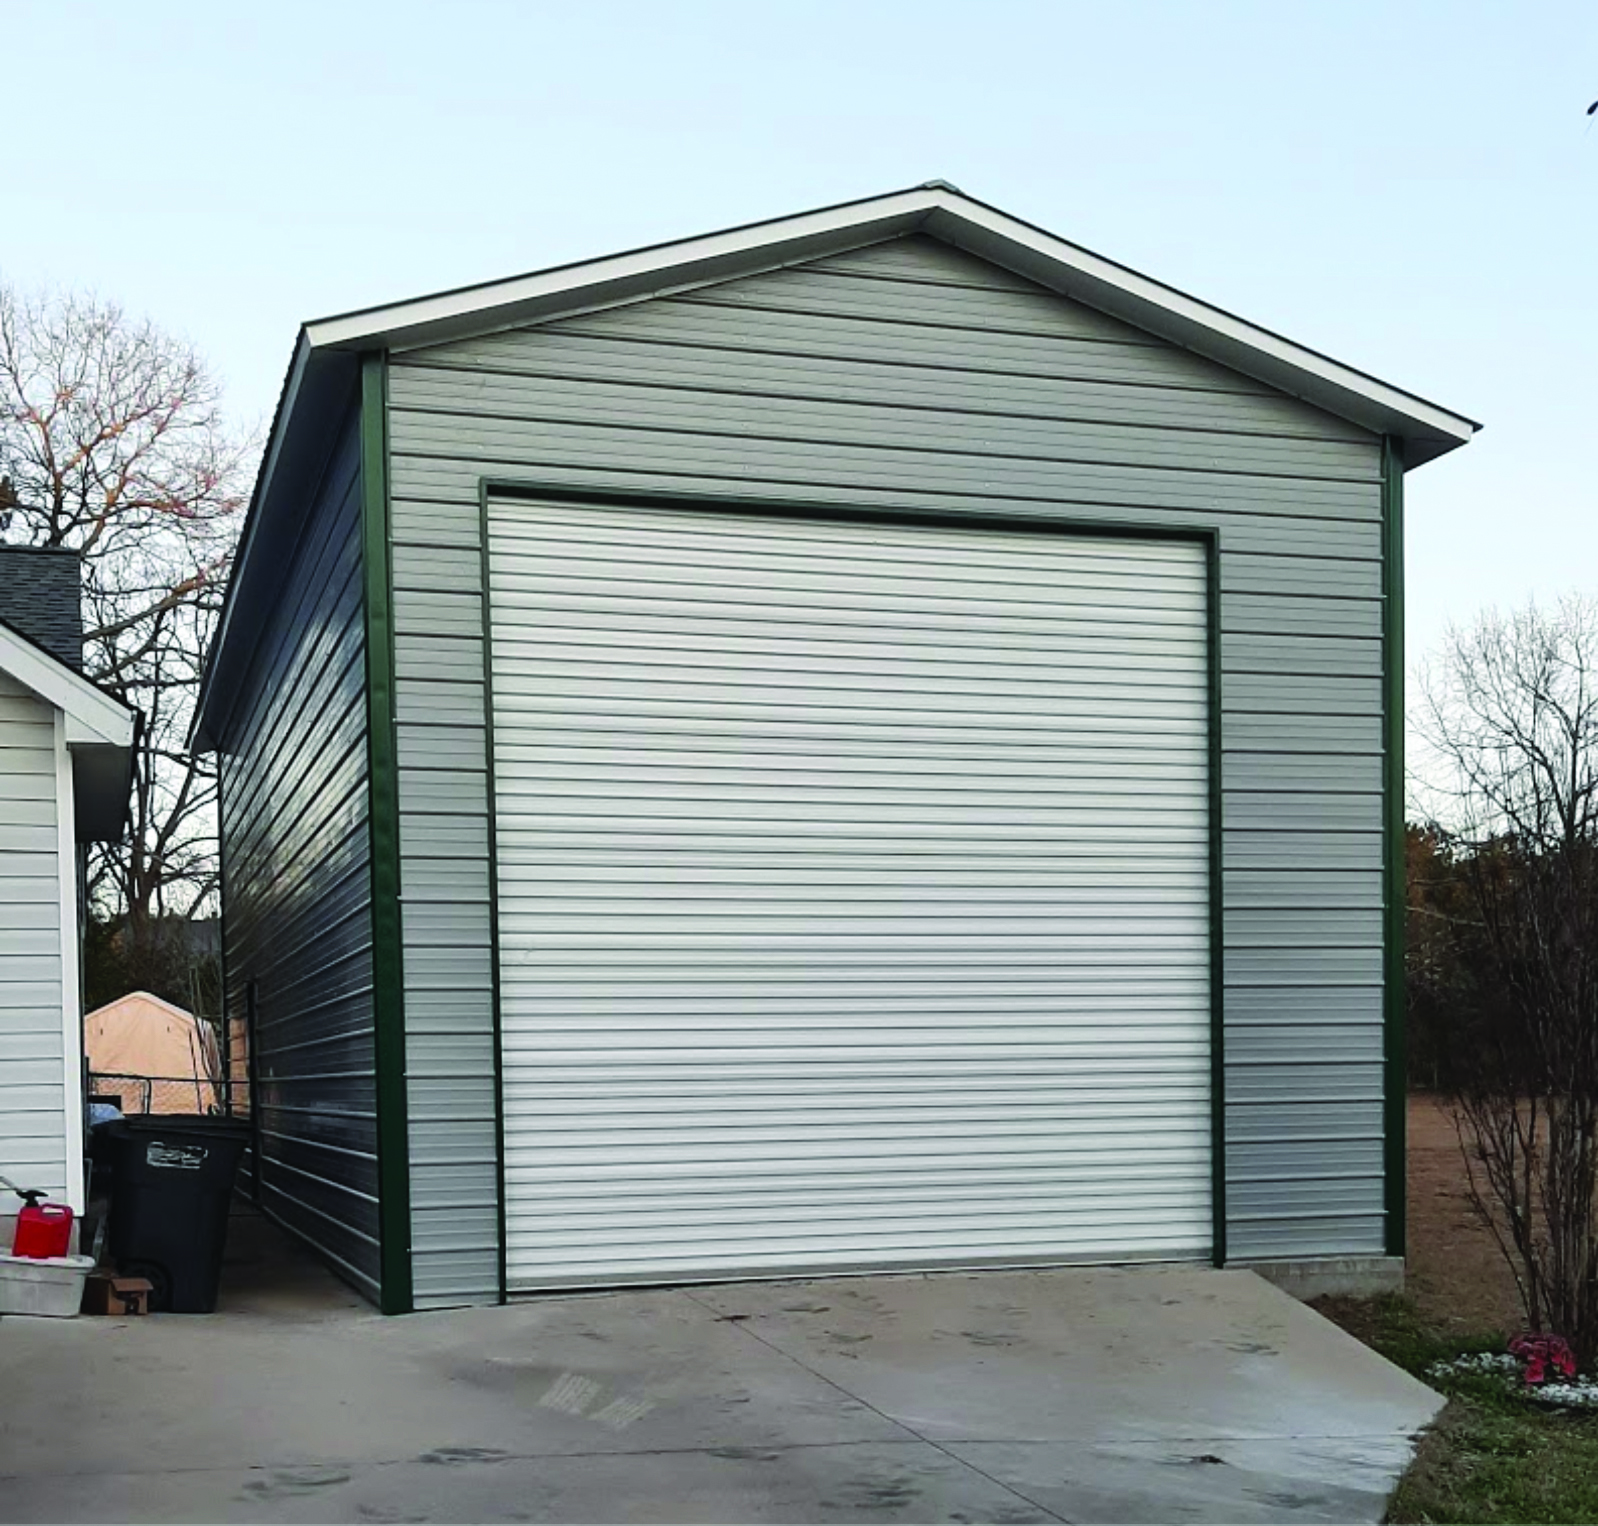 VALUE SINGLE GARAGE, BOXED EAVE  *PHOTO REPRESENTATION IS AN EXAMPLE ONLY / ACTUAL PRODUCT MAY VARY